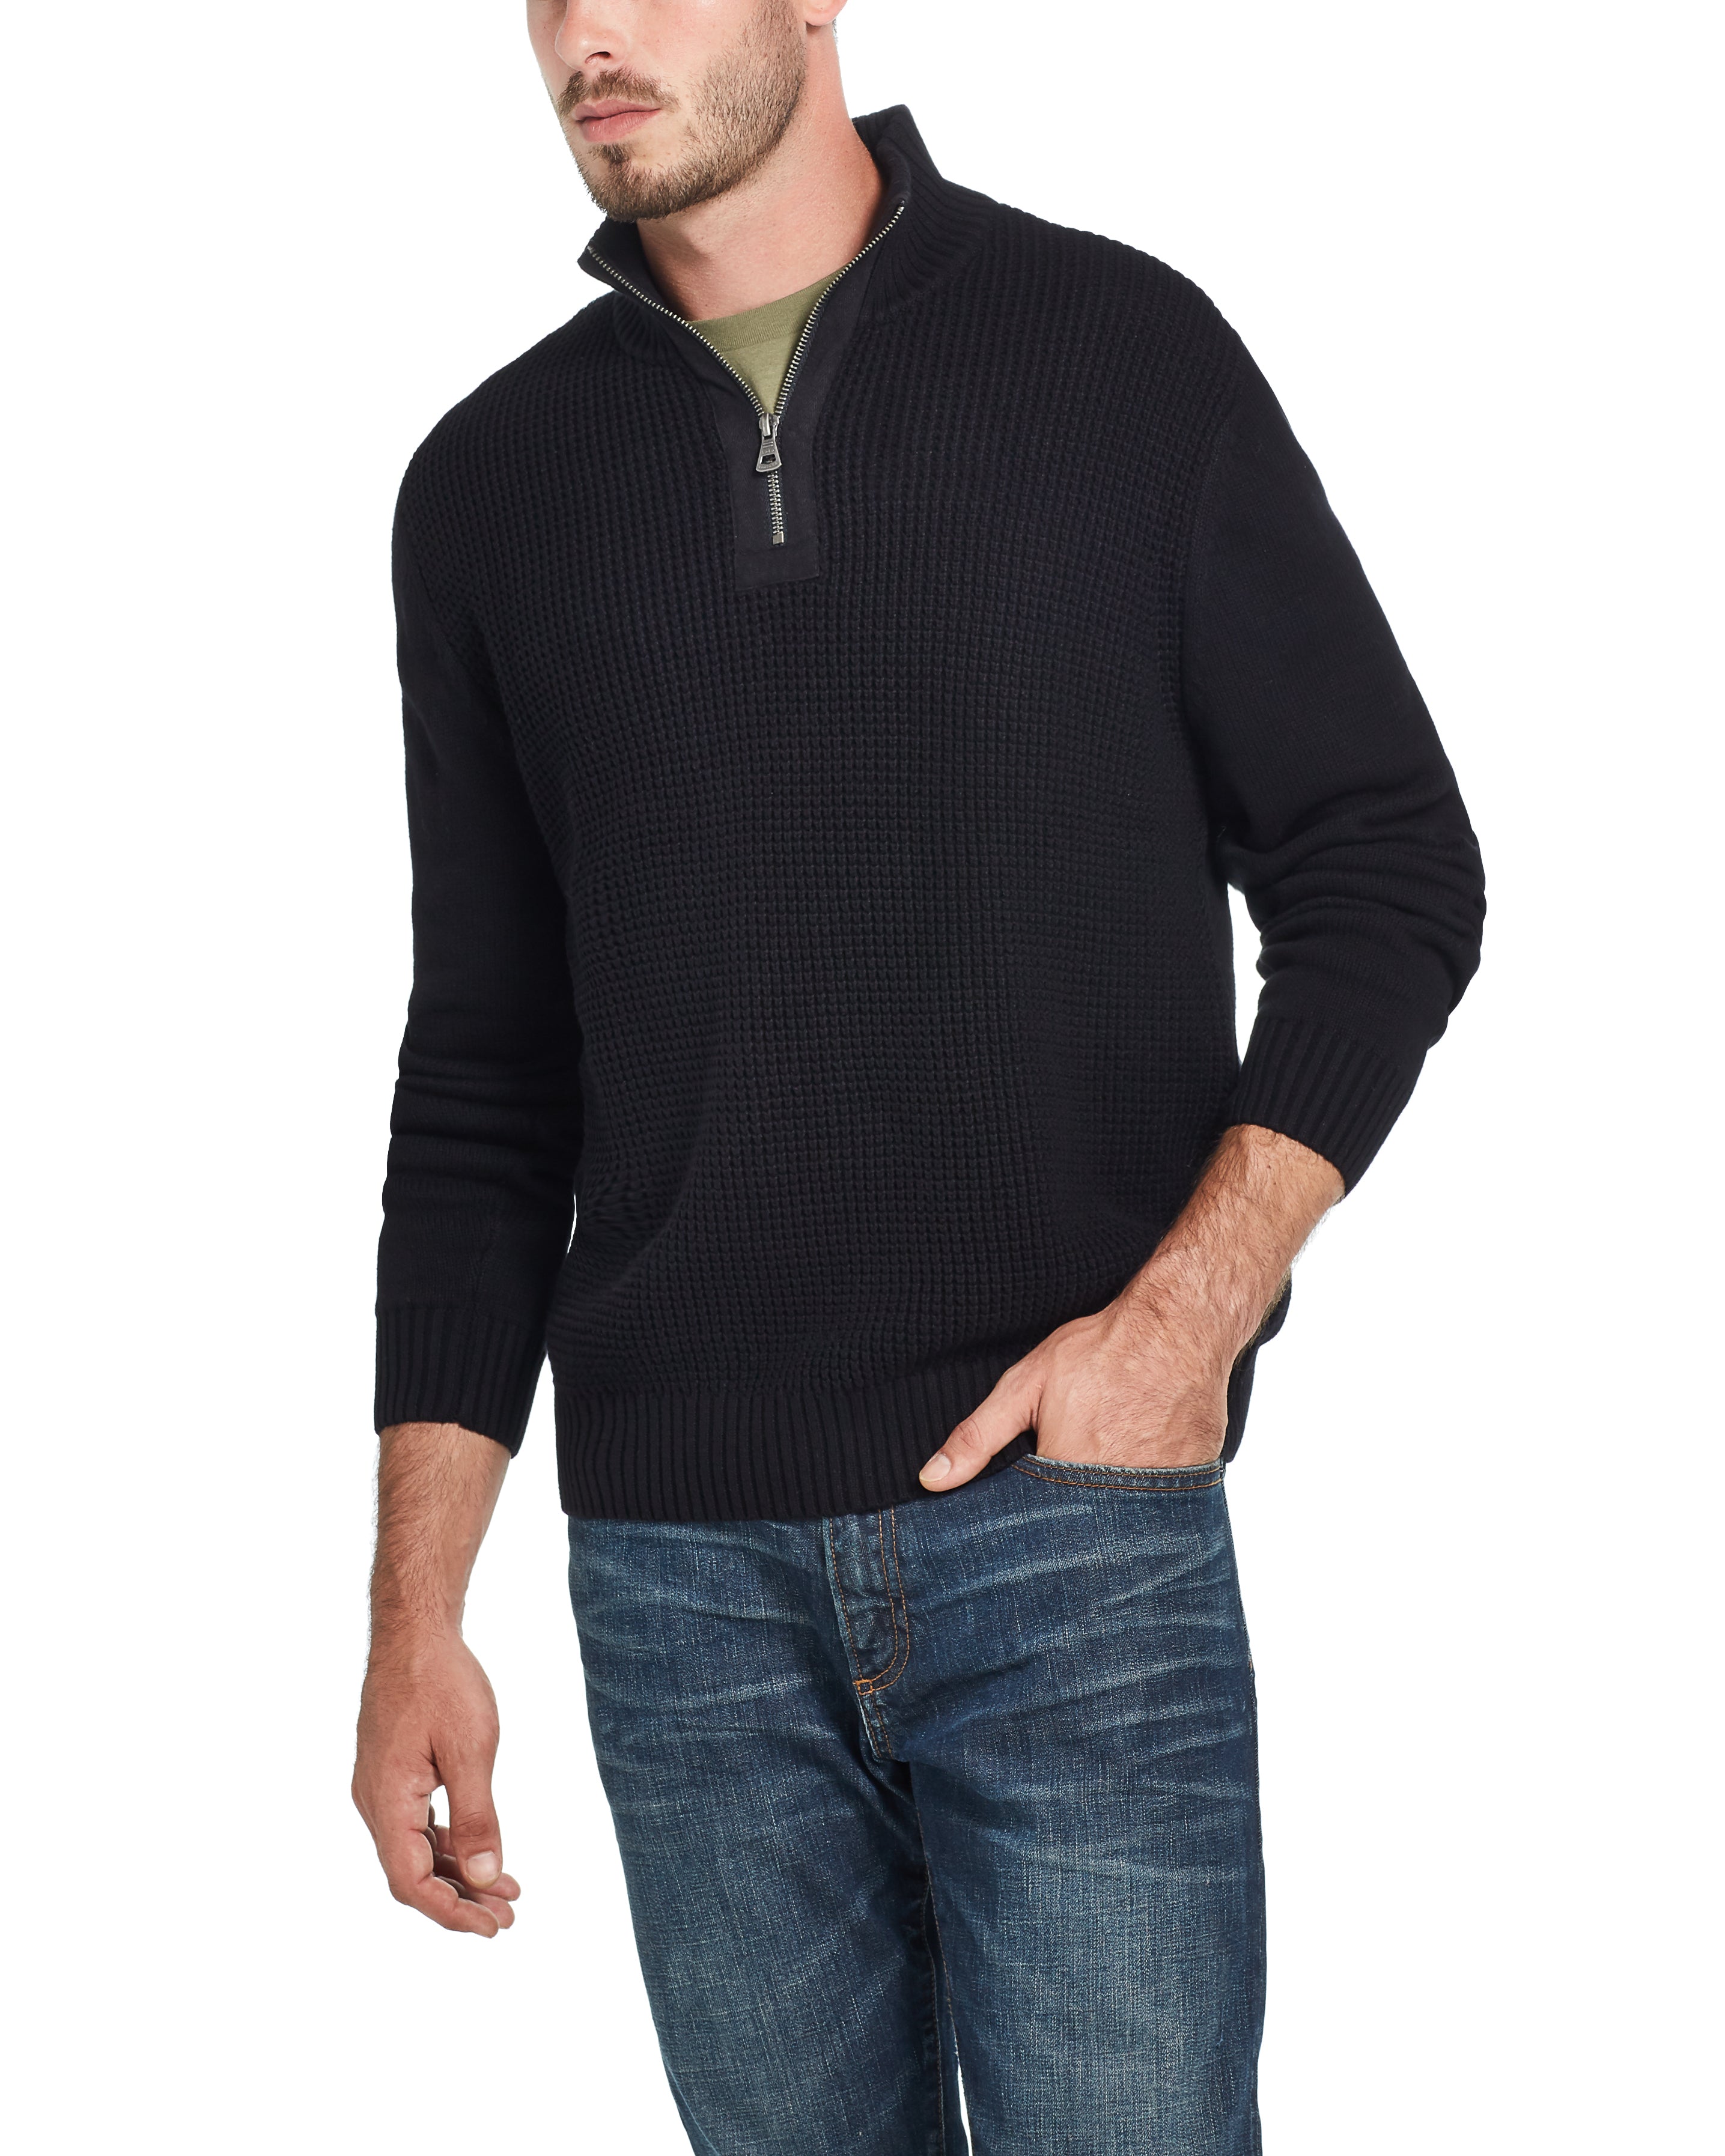 WAFFLE TEXTURE 1/4 ZIP SWEATER in BLUE BLACK